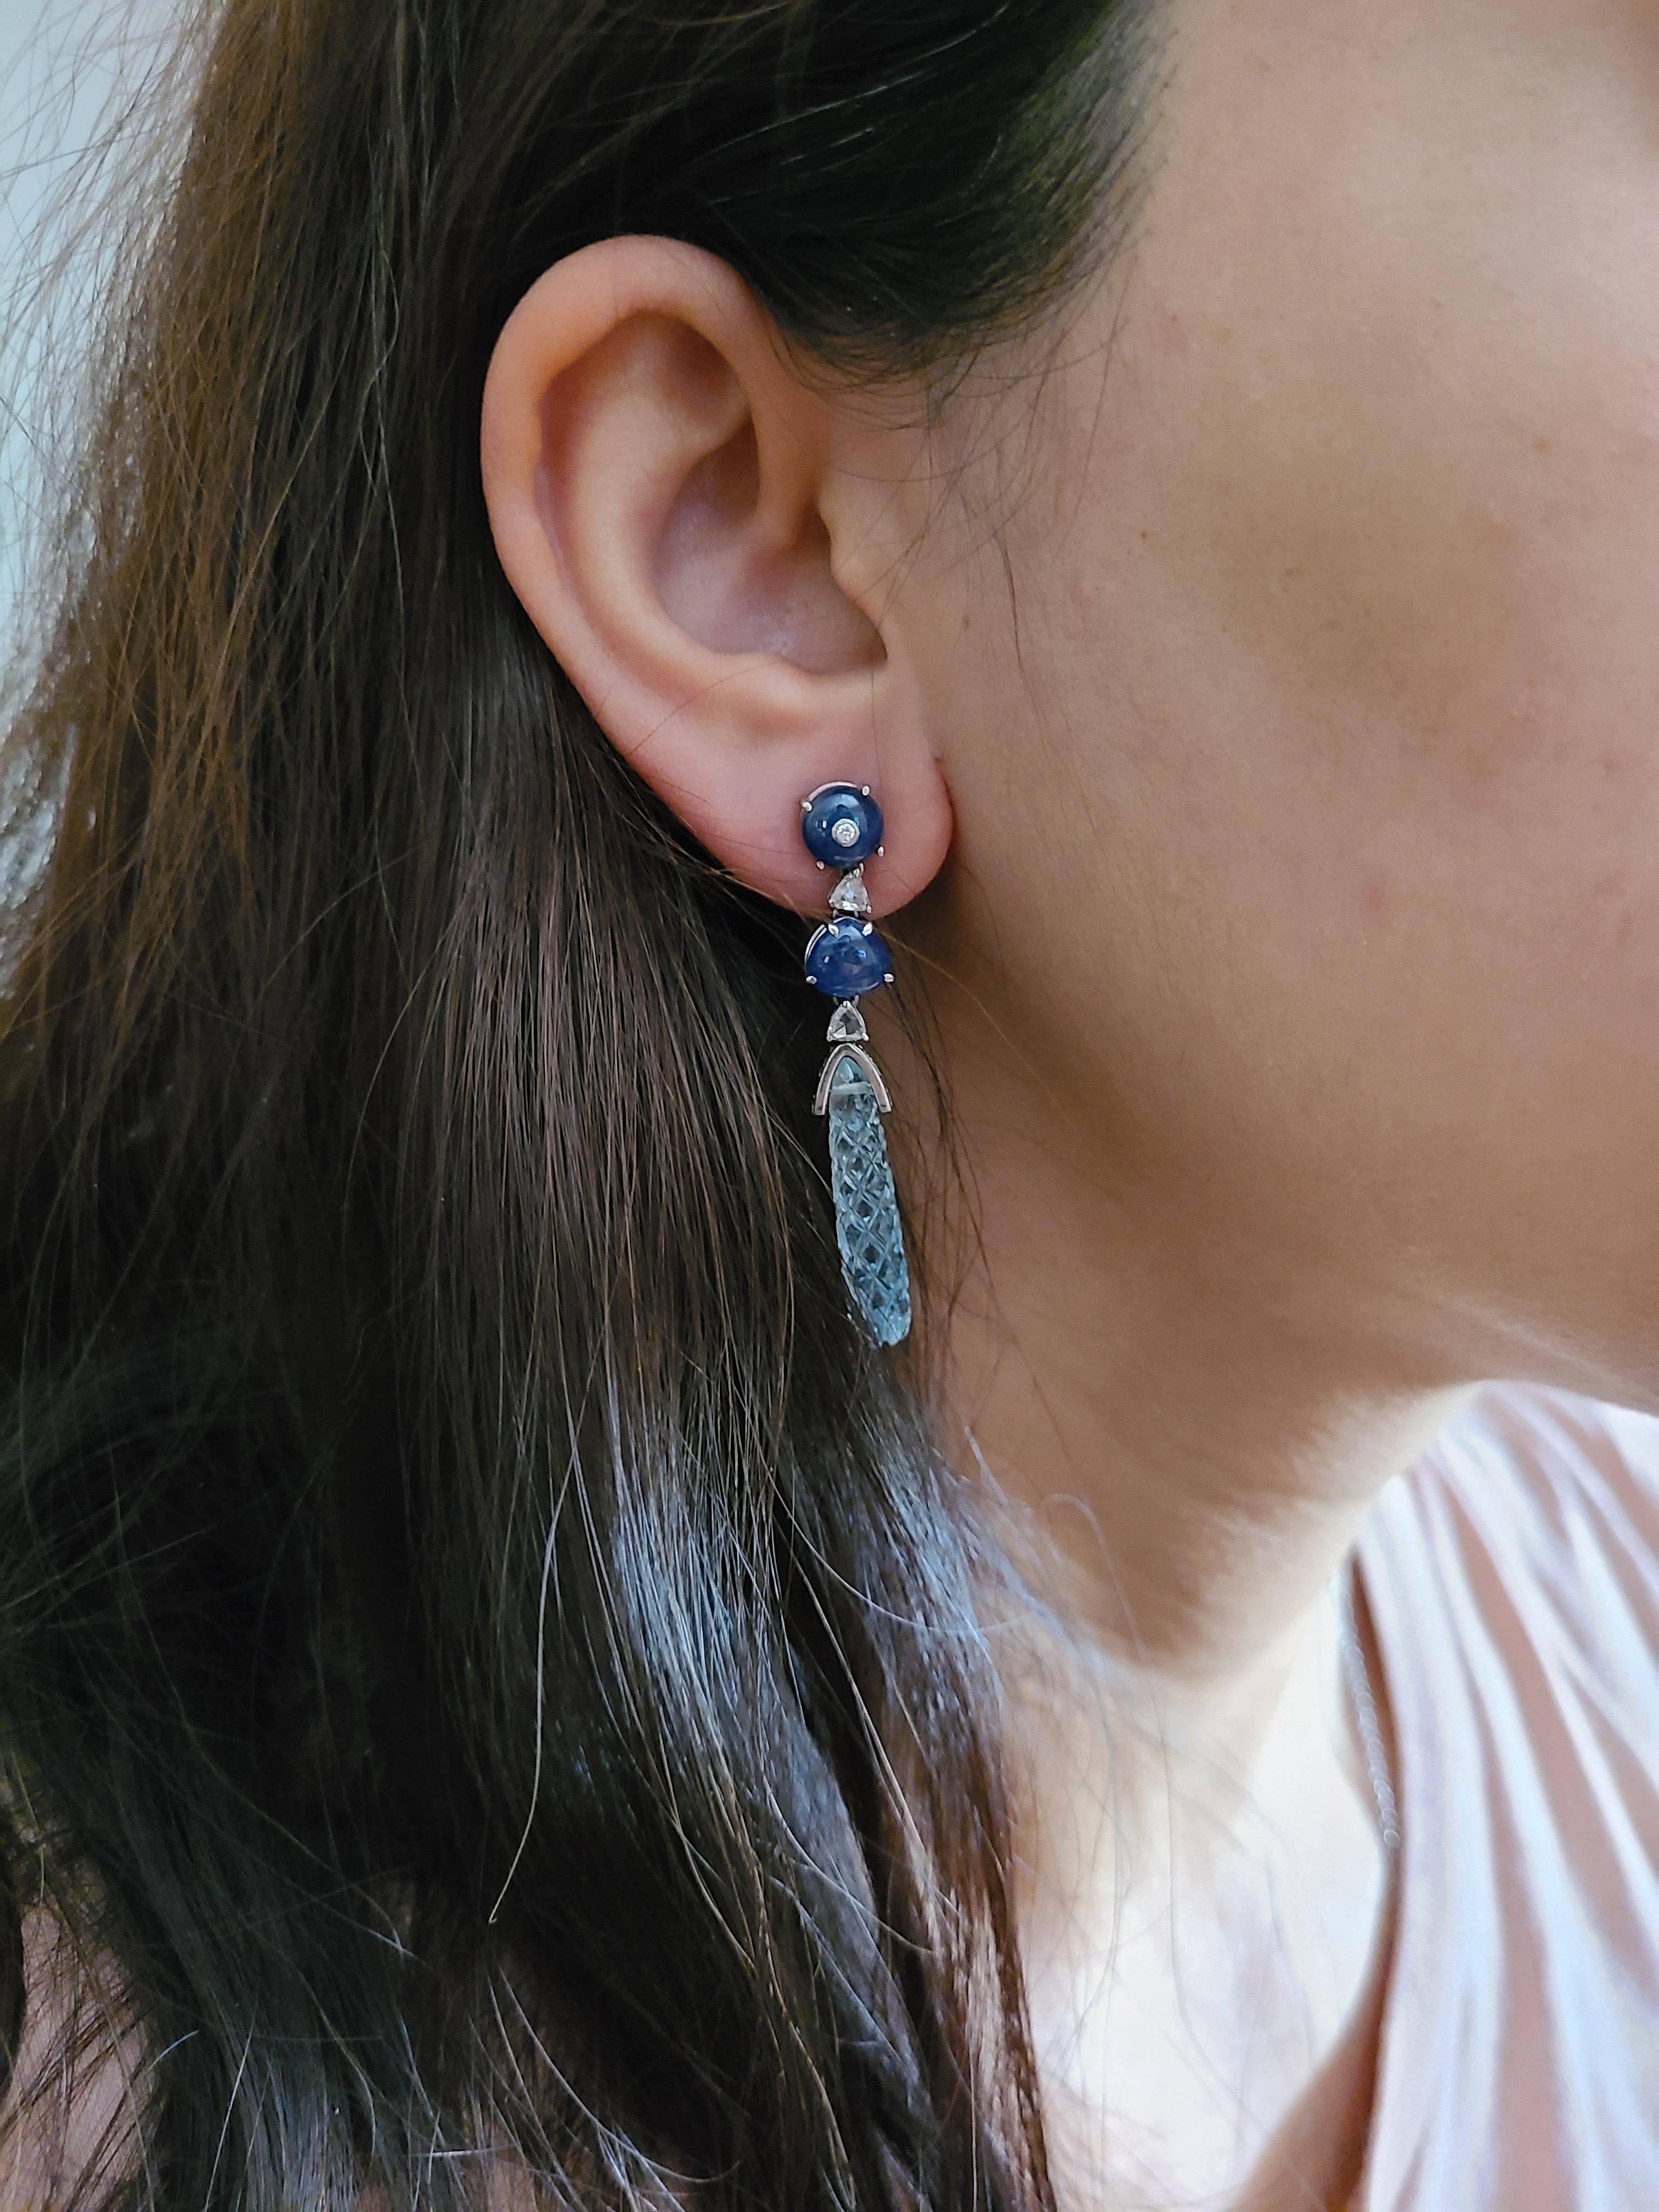 A beautiful and elegant set of earrings set in 18k white gold with natural aquamarine , blue sapphire and diamonds. The aquamarine weight is 12.06 carats , blue sapphire weight is 8.57 carats and diamond weight is 1.455 carats. The earrings